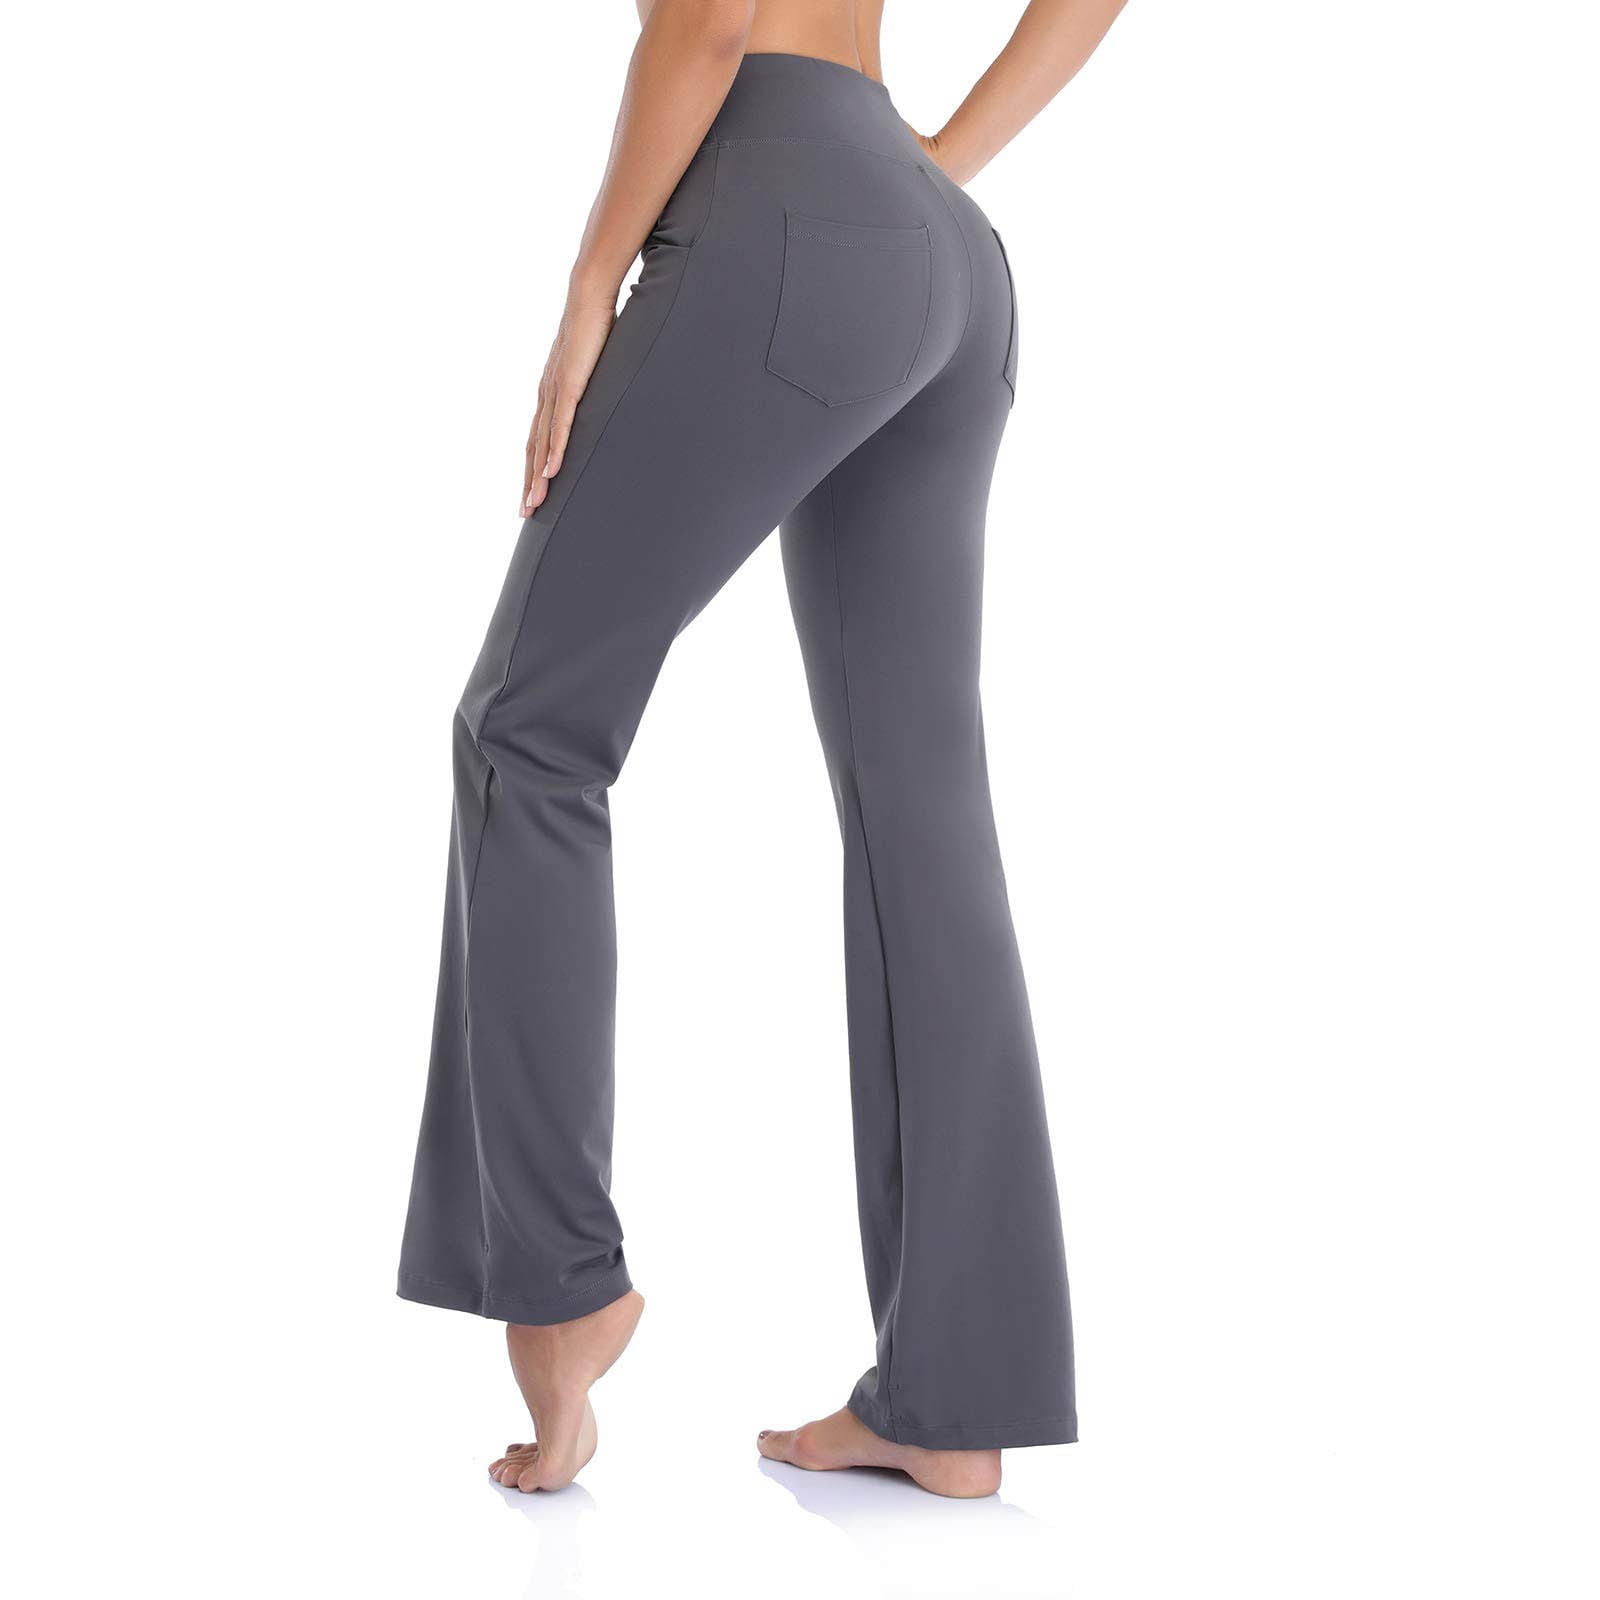 pizza nyt år Betydning Huaai Women Yoga Pants High Waist Flare Leggings Wide Straight Leg Sports  Trousers Flared Trousers With Pocket For Yoga Pilates Fitness Plus Size  Pants For Women Grey S - Walmart.com